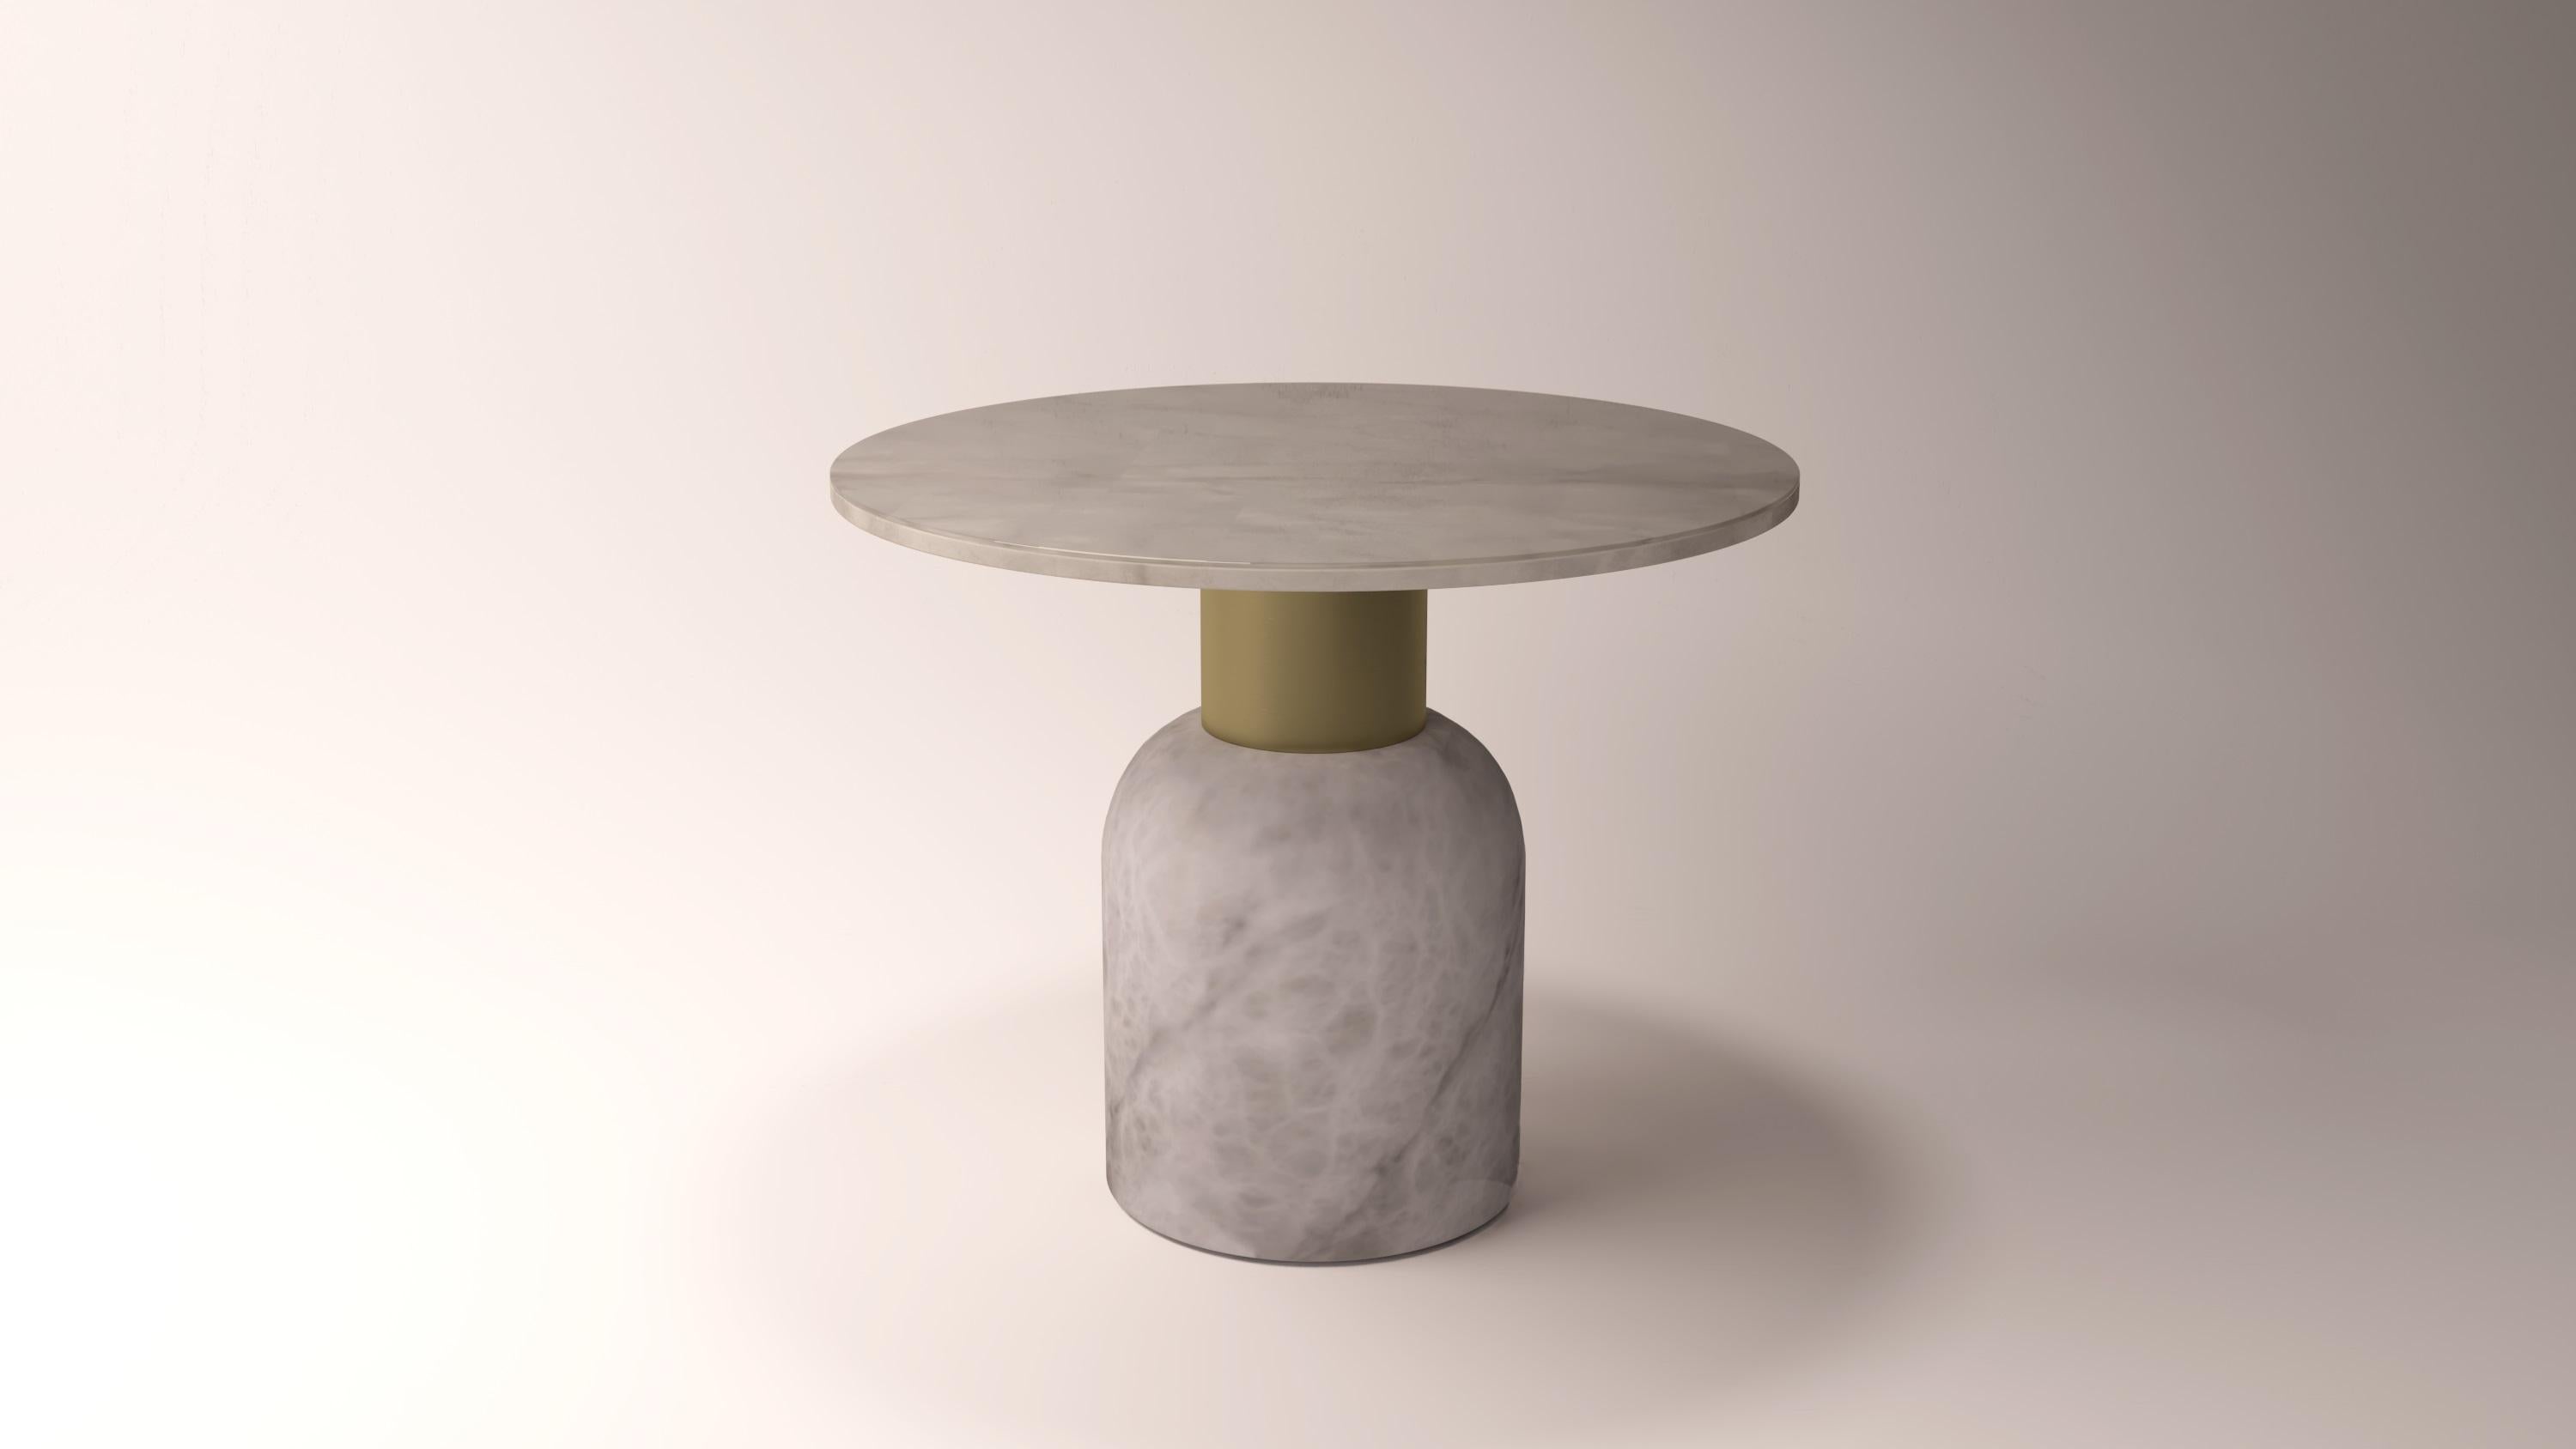 Serenity Fusion 40 Alabaster Table by Alabastro Italiano
Dimensions: D 50 x H 40 cm.
Materials: White alabaster, brushed brass.
36.5 kg.

Available in another size: H 50 cm.
Available in other metal finishes.
Available in different combinations of